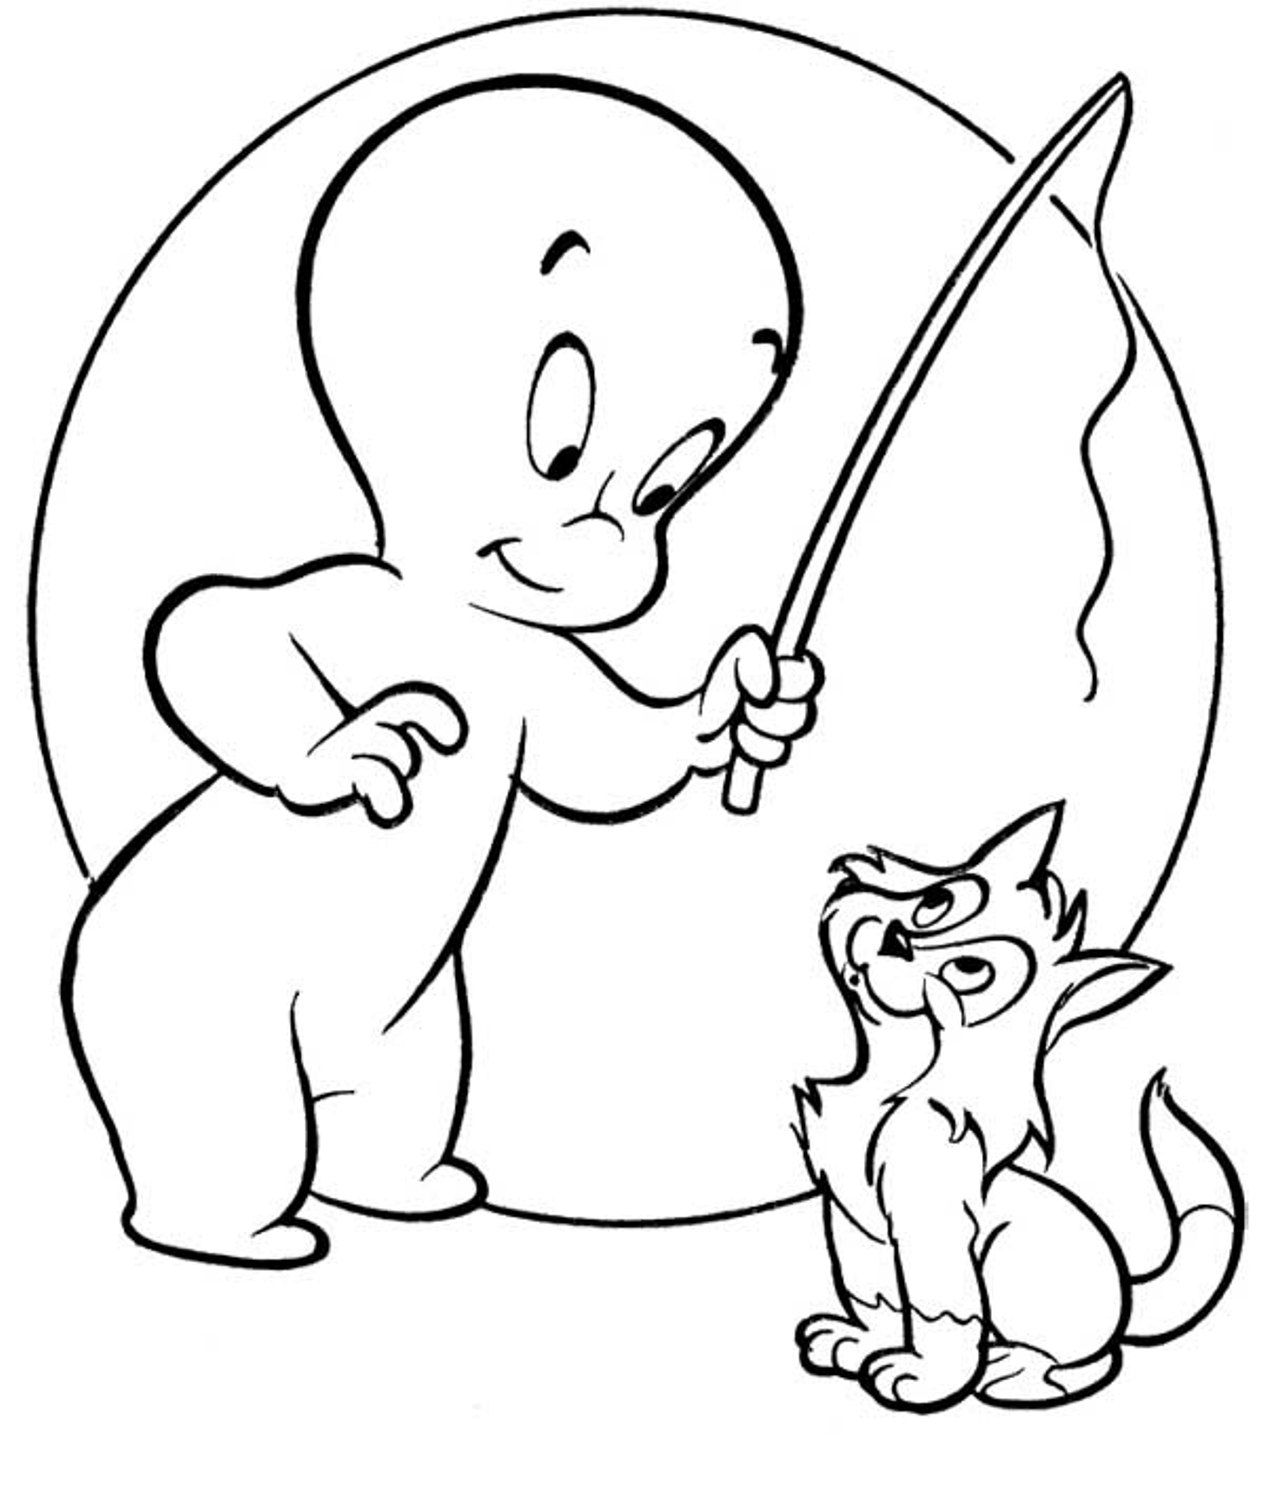 Ghost Coloring Pages For Kids Cartoon Casper | Cartoon Coloring ...